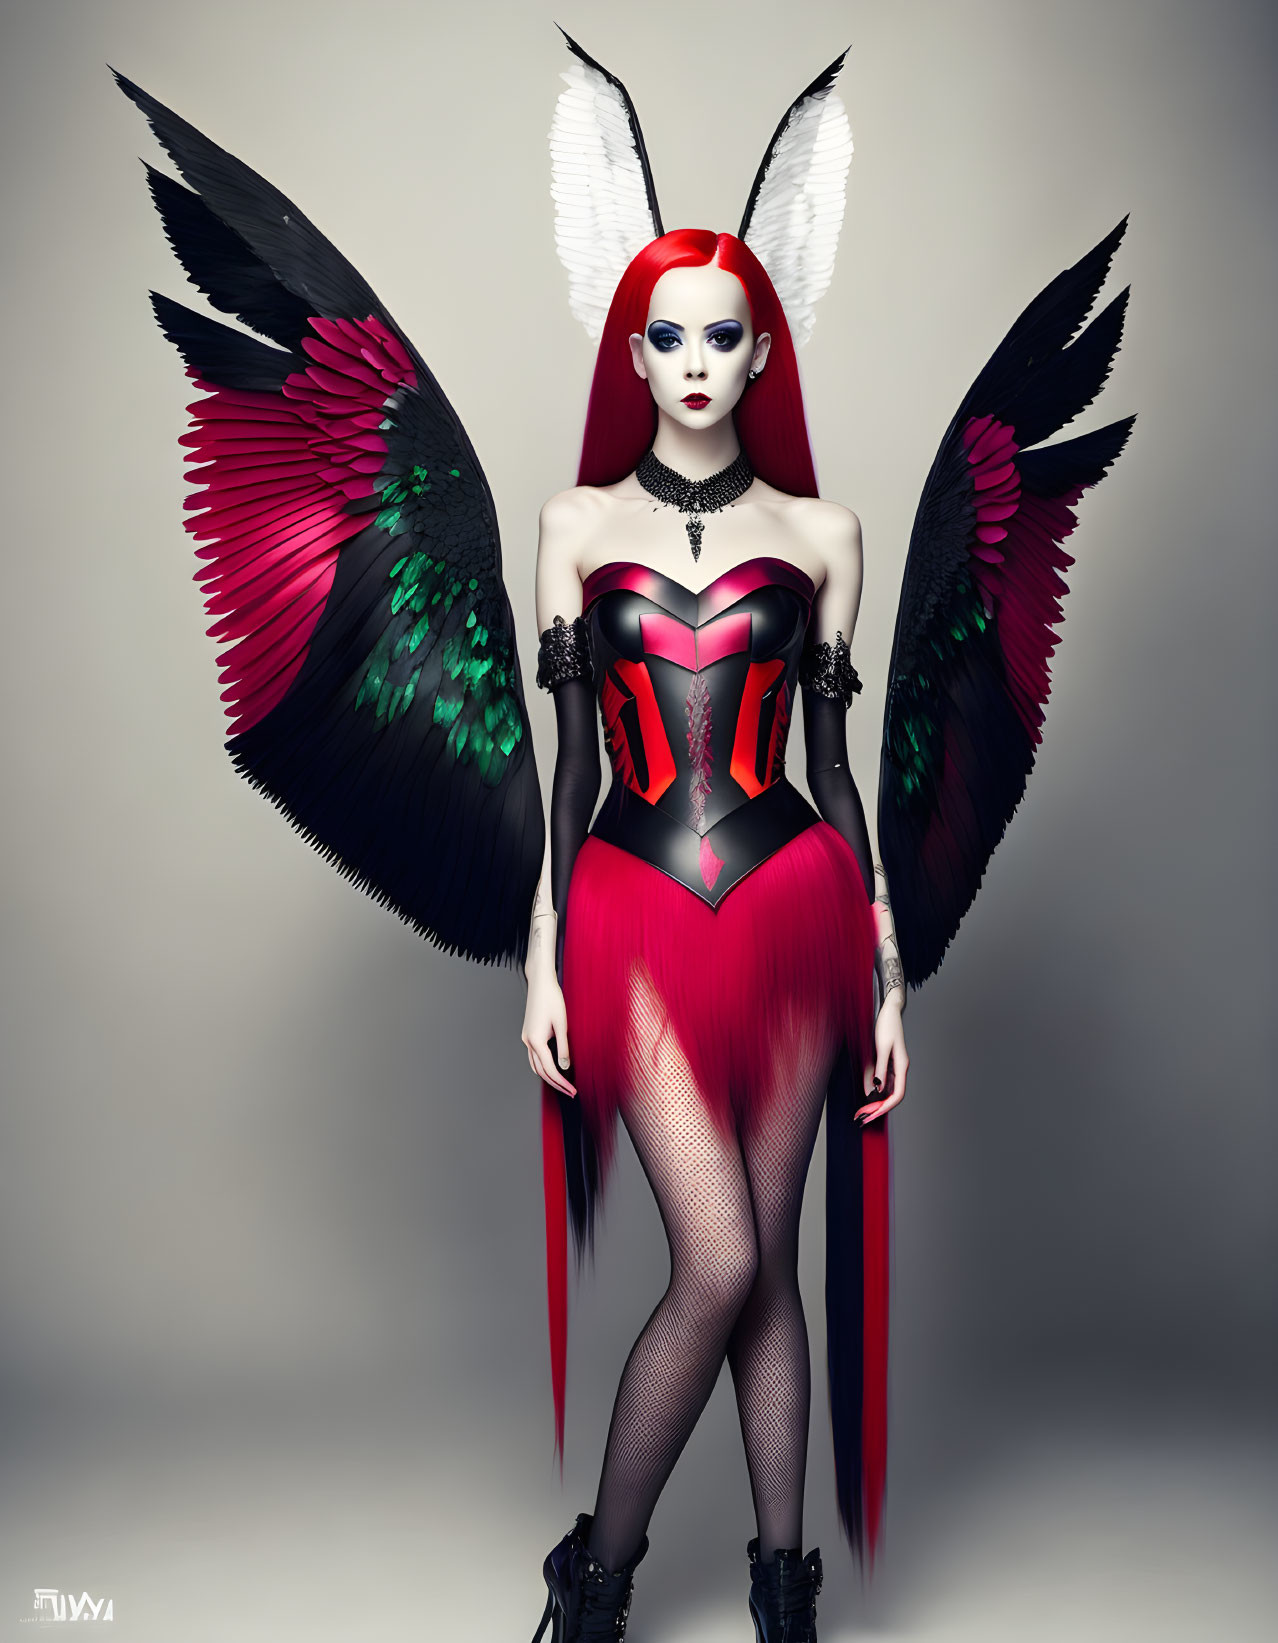 Stylized female figure with iridescent wings and red attire